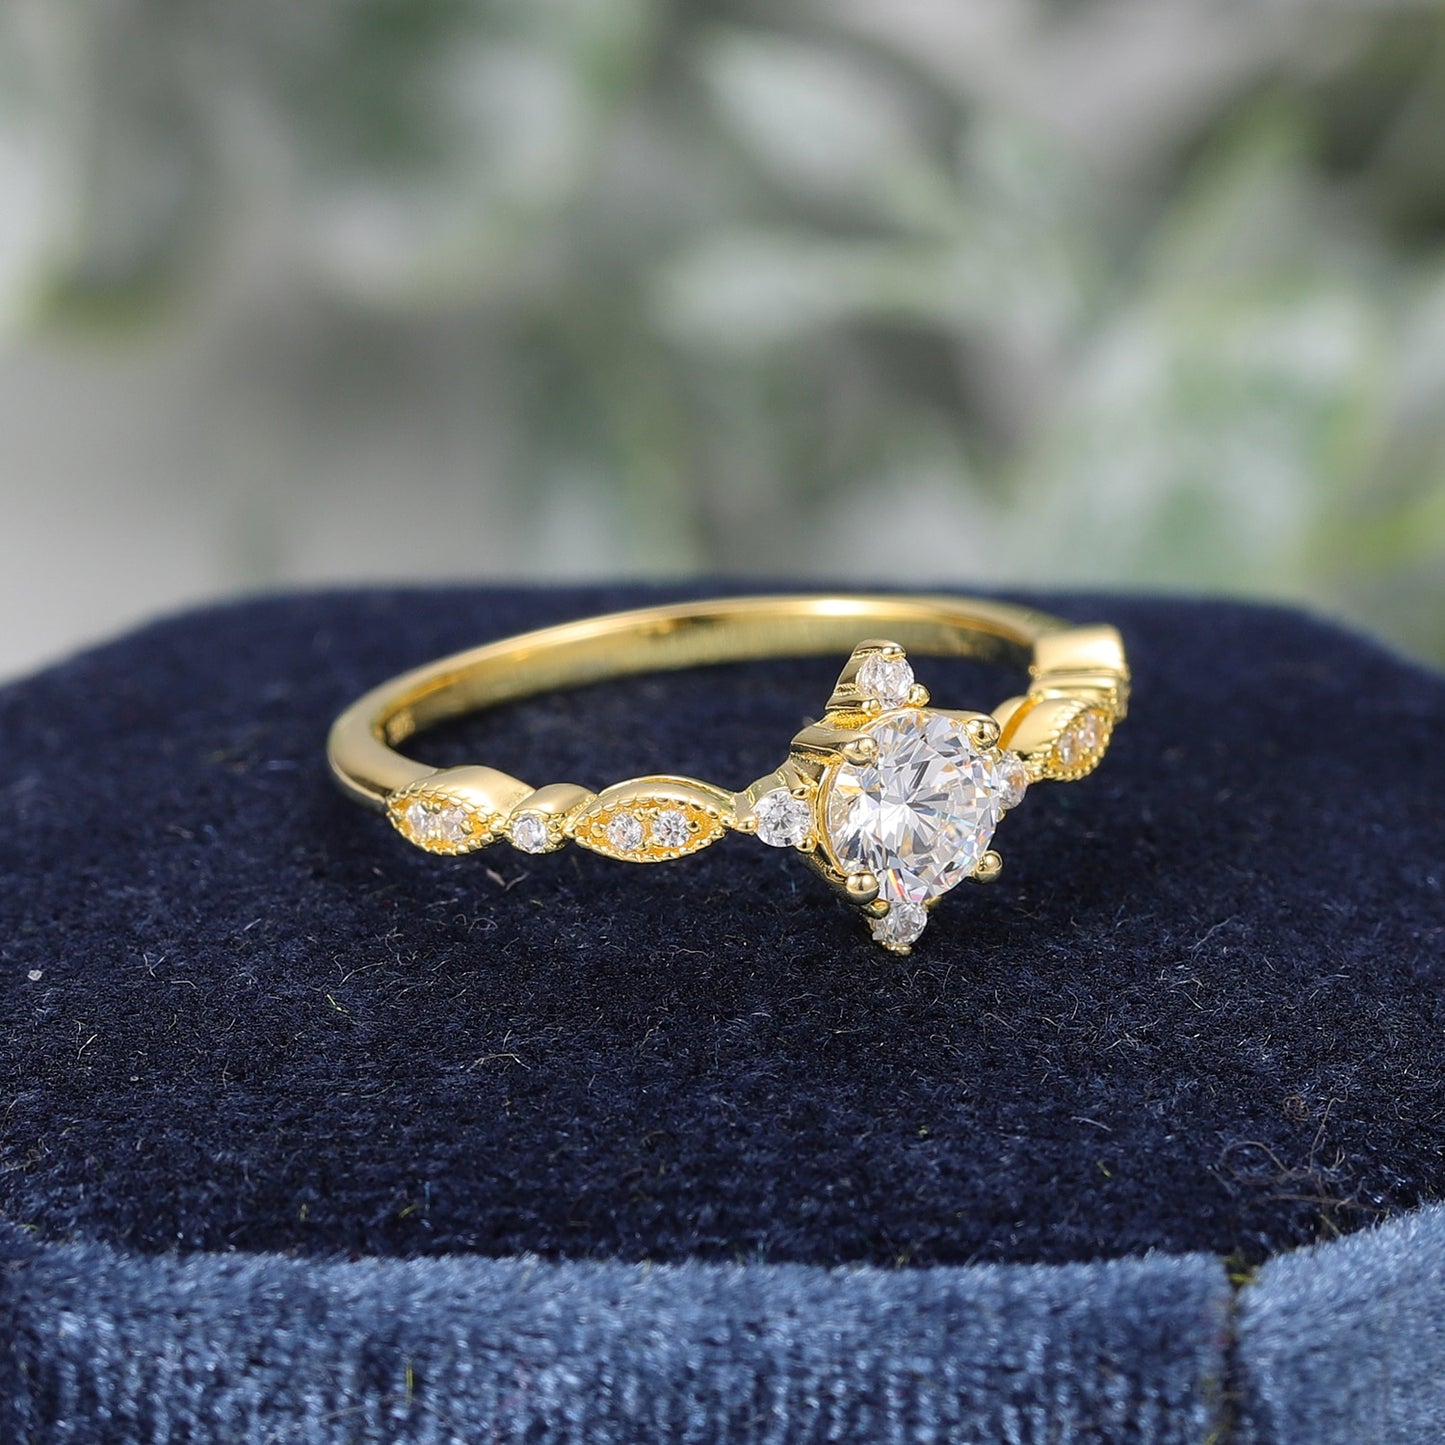 A gold vintage inspired engagement ring set with a round moissanite and 4 small zircons on all four sides.